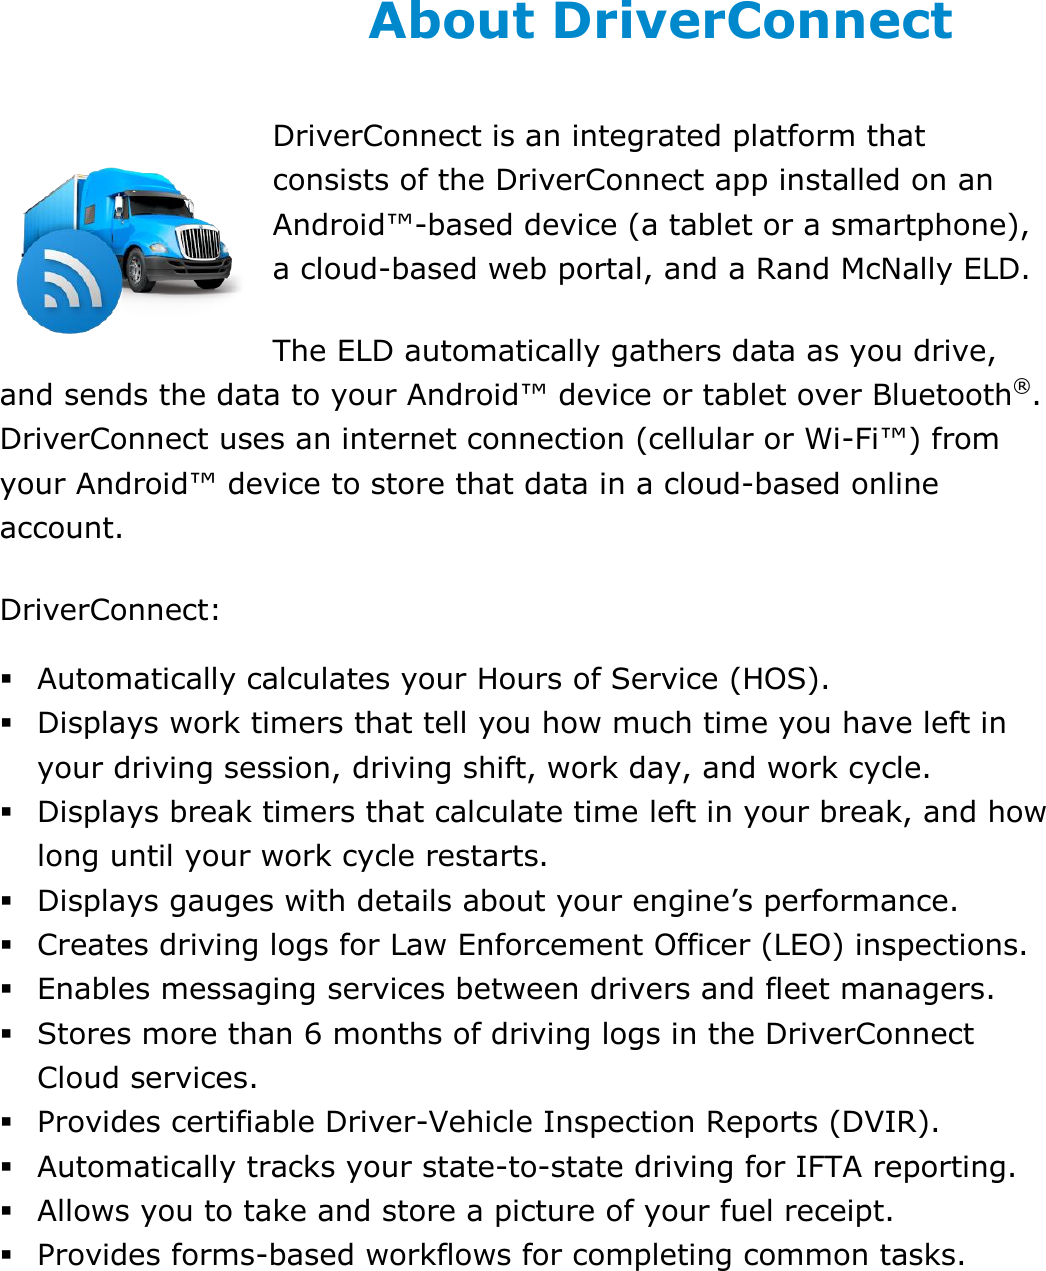 About This Guide DriverConnect User Guide  5 © 2017, Rand McNally, Inc. About DriverConnect DriverConnect is an integrated platform that consists of the DriverConnect app installed on an Android™-based device (a tablet or a smartphone), a cloud-based web portal, and a Rand McNally ELD. The ELD automatically gathers data as you drive, and sends the data to your Android™ device or tablet over Bluetooth®. DriverConnect uses an internet connection (cellular or Wi-Fi™) from your Android™ device to store that data in a cloud-based online account. DriverConnect:  Automatically calculates your Hours of Service (HOS).  Displays work timers that tell you how much time you have left in your driving session, driving shift, work day, and work cycle.  Displays break timers that calculate time left in your break, and how long until your work cycle restarts.  Displays gauges with details about your engine’s performance.  Creates driving logs for Law Enforcement Officer (LEO) inspections.  Enables messaging services between drivers and fleet managers.  Stores more than 6 months of driving logs in the DriverConnect Cloud services.  Provides certifiable Driver-Vehicle Inspection Reports (DVIR).  Automatically tracks your state-to-state driving for IFTA reporting.  Allows you to take and store a picture of your fuel receipt.  Provides forms-based workflows for completing common tasks.   